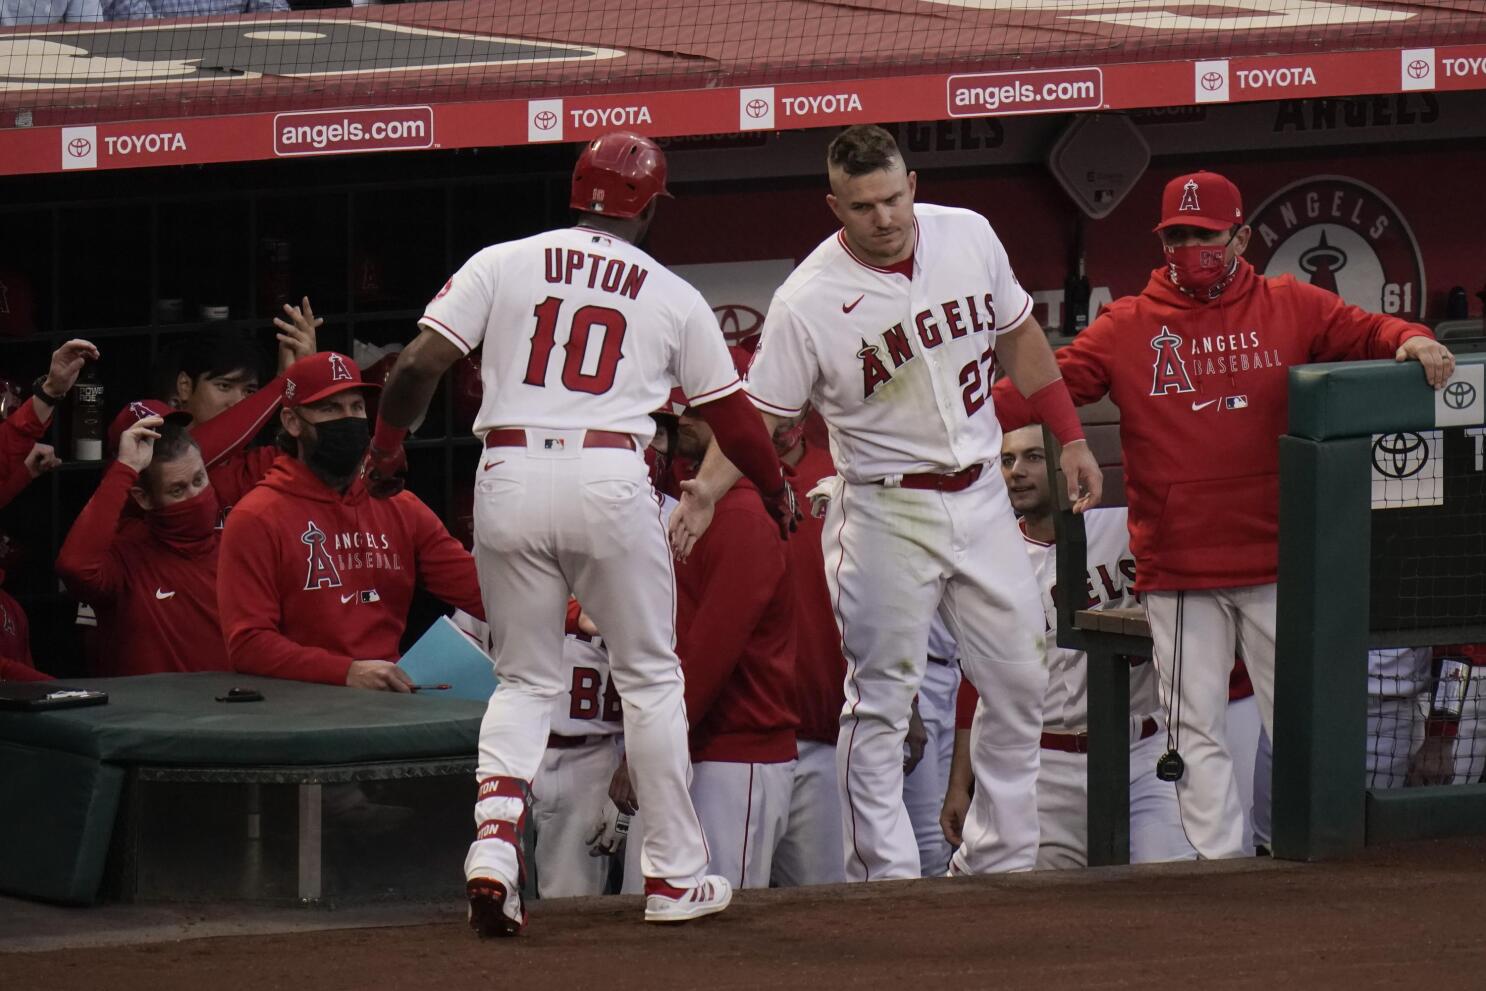 Recap: Mike Trout Prevents Run & Hits Homer, Dodgers Remain